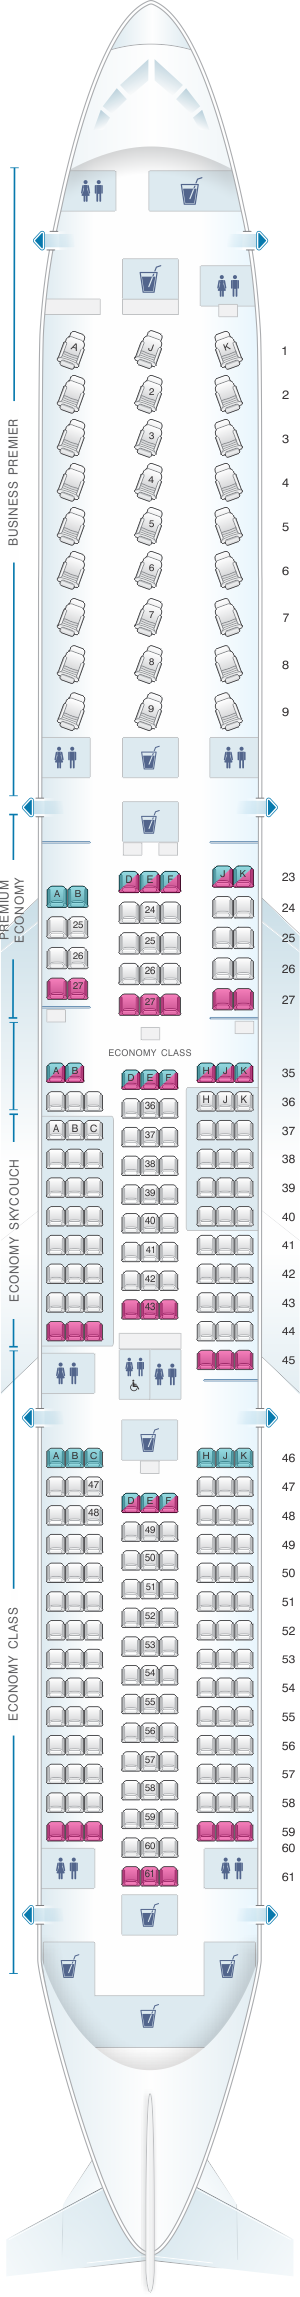 Seat map for Air New Zealand Boeing B787 9 Config.2